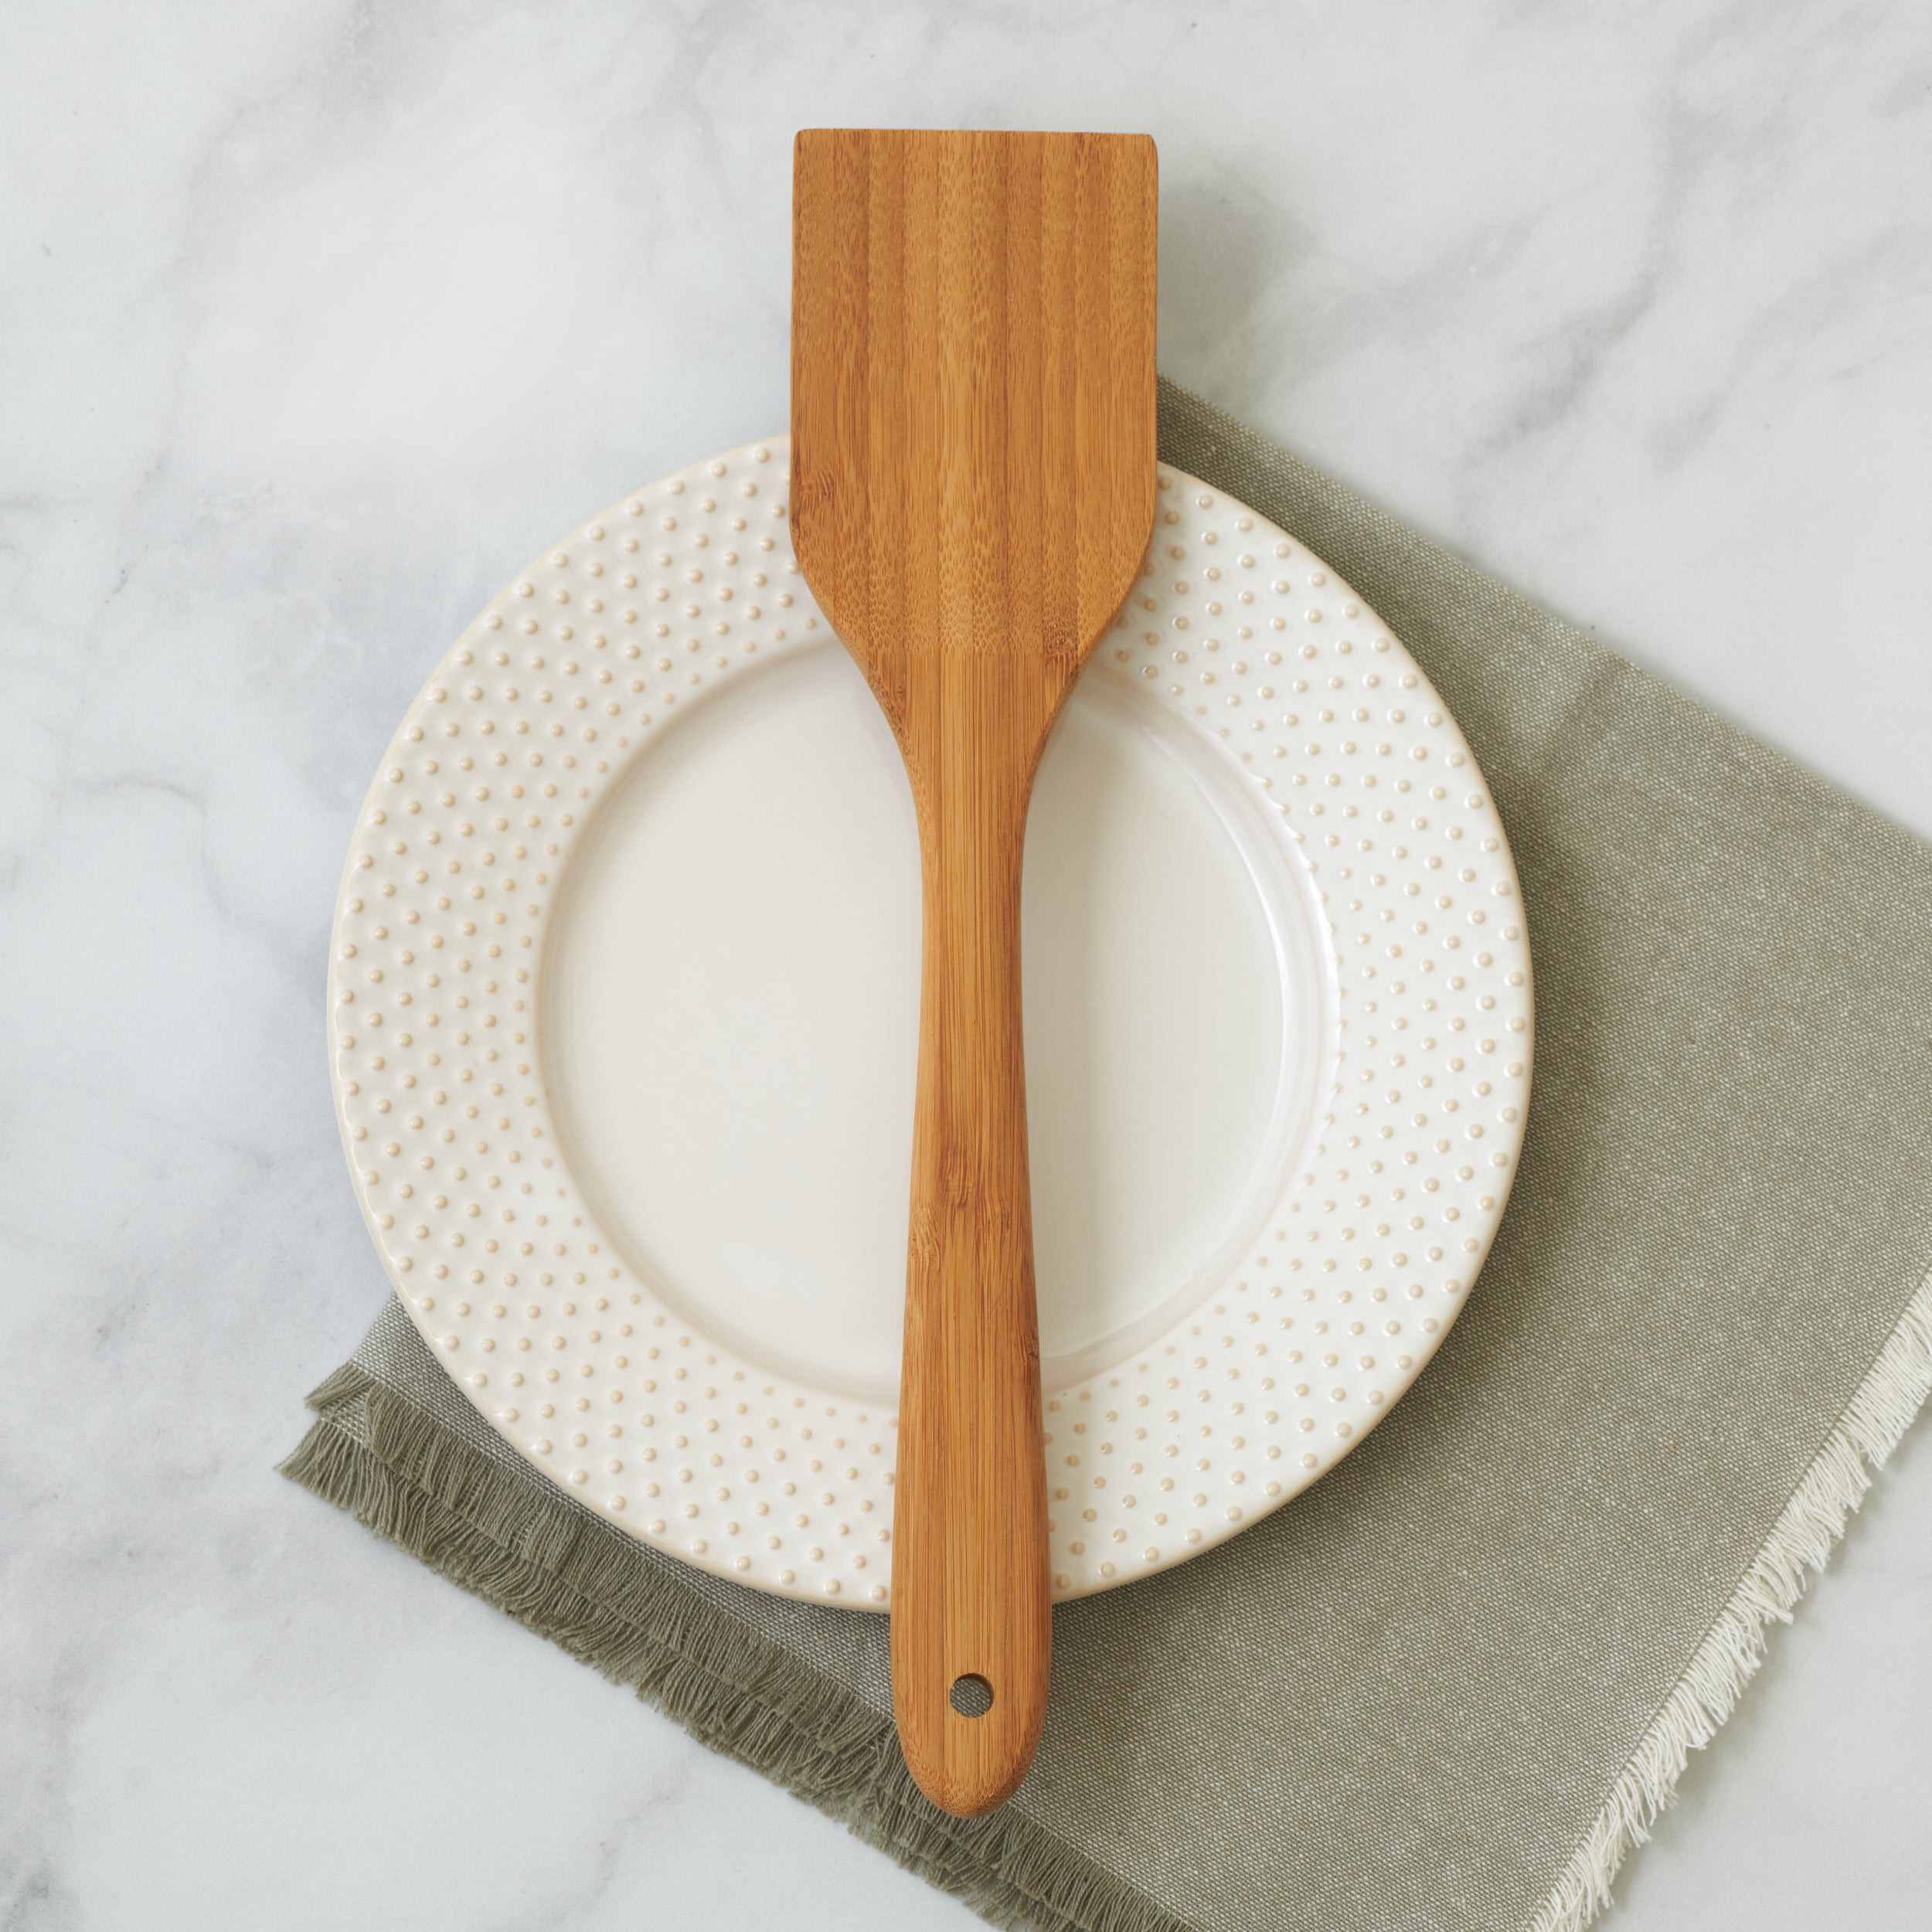 2 spoons and a spatula made from Bamboo! With super cute patterns